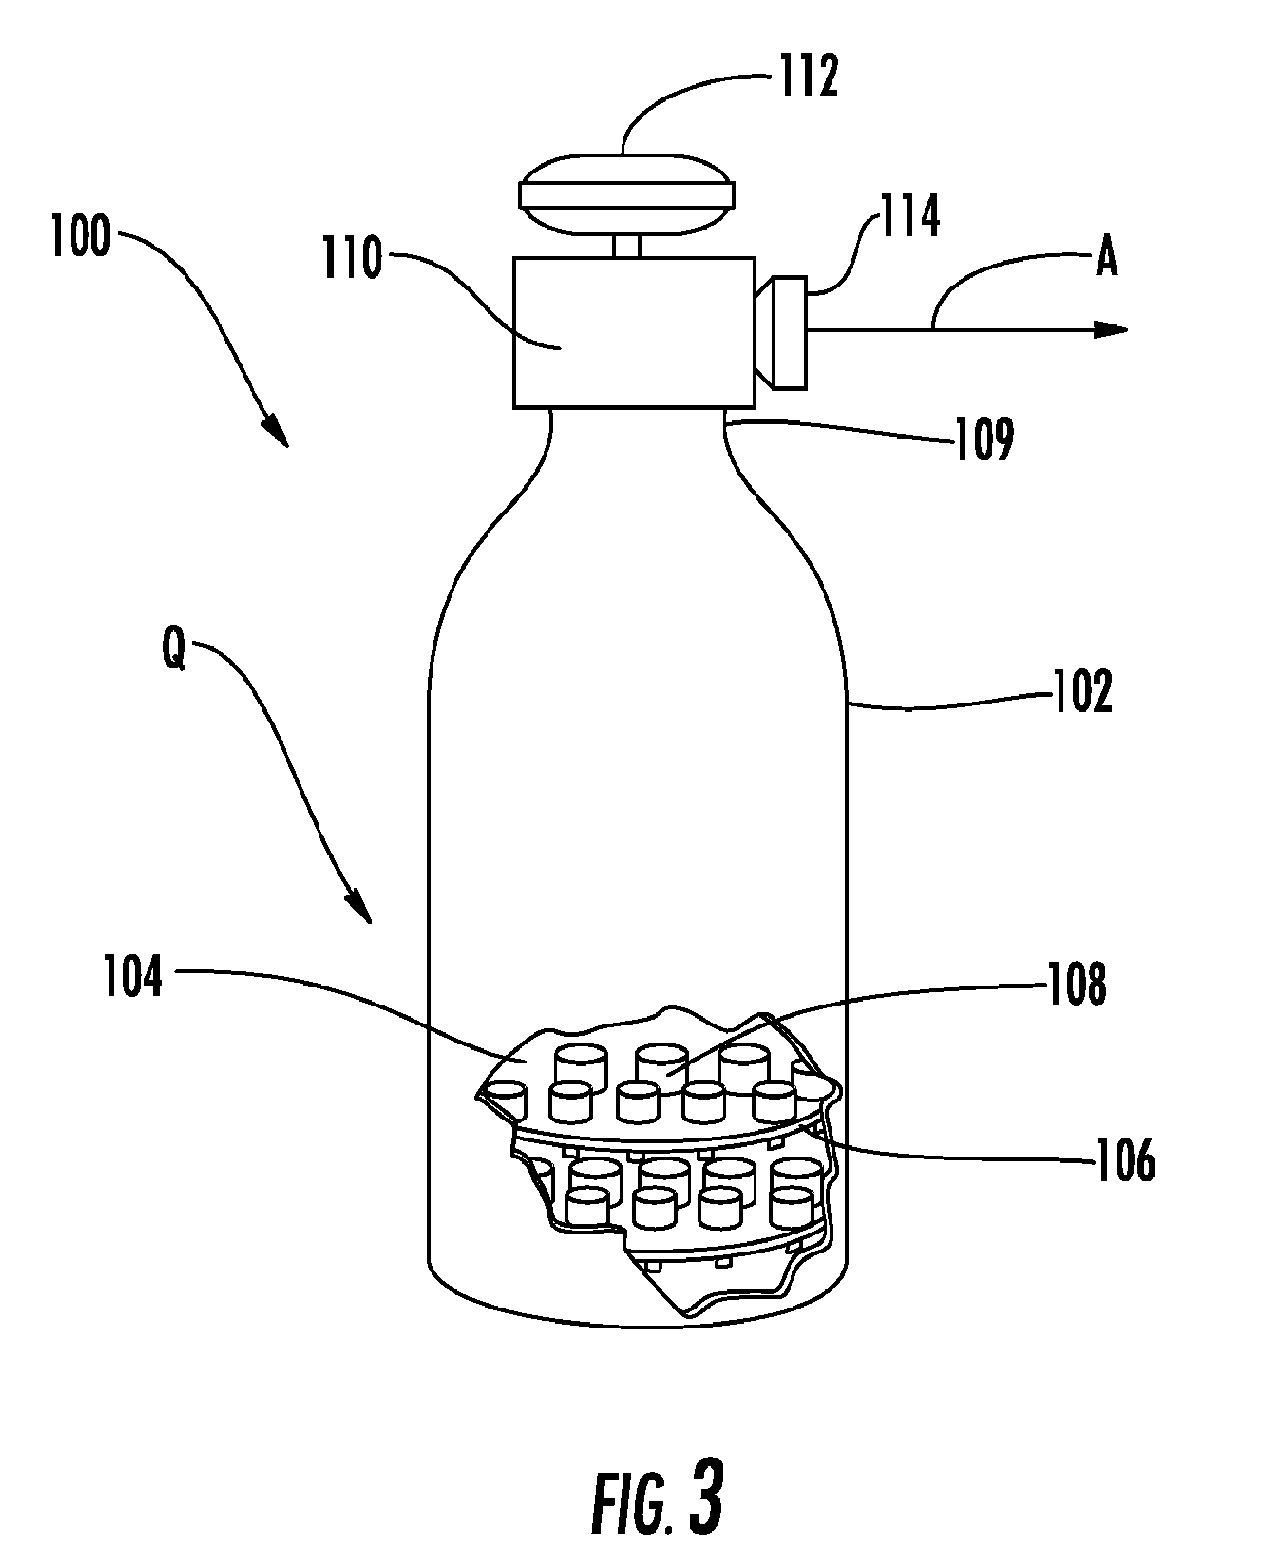 Strontium and barium precursors for use in chemical vapor deposition, atomic layer deposition and rapid vapor deposition